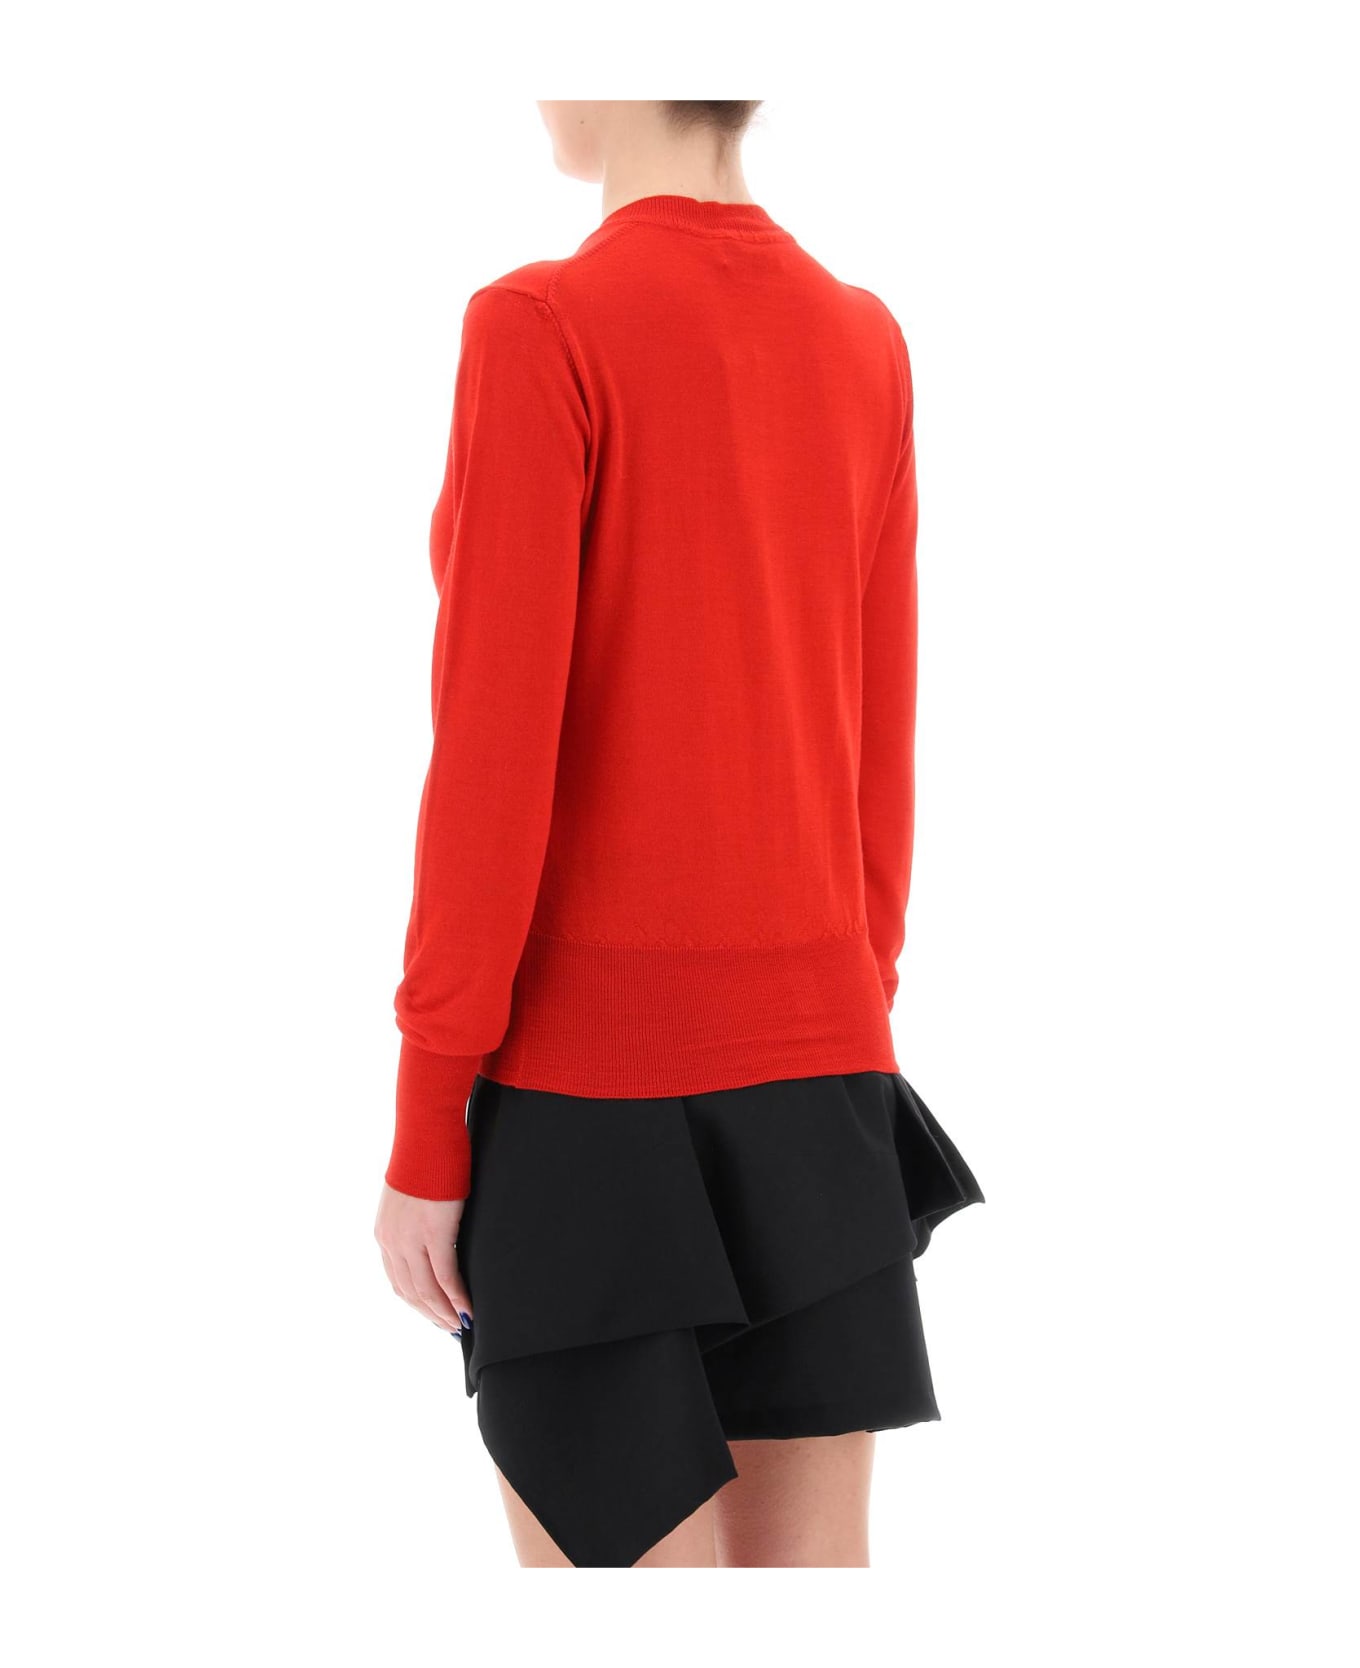 Vivienne Westwood Bea Cardigan With Embroidered Logo - RED (Red) カーディガン